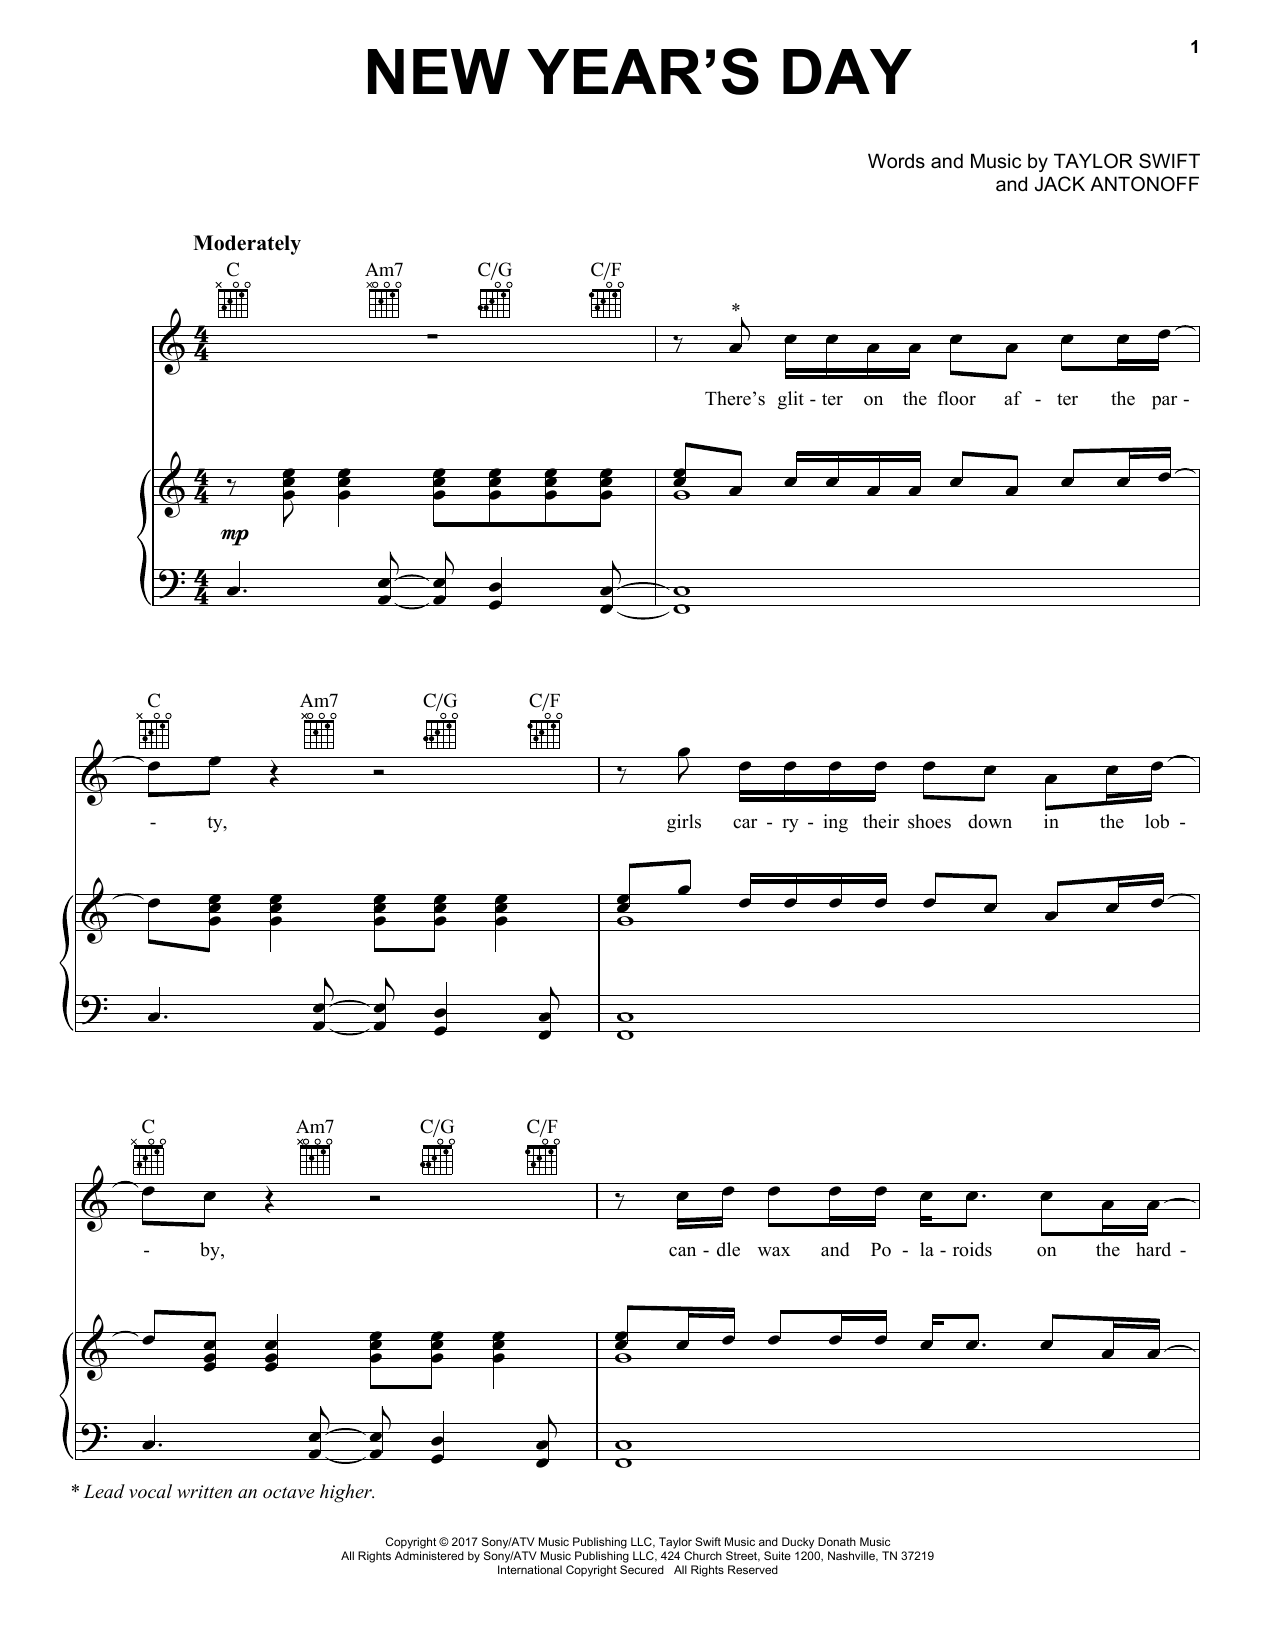 Taylor Swift "New Year's Day" Sheet Music Notes, Chords | Easy Piano